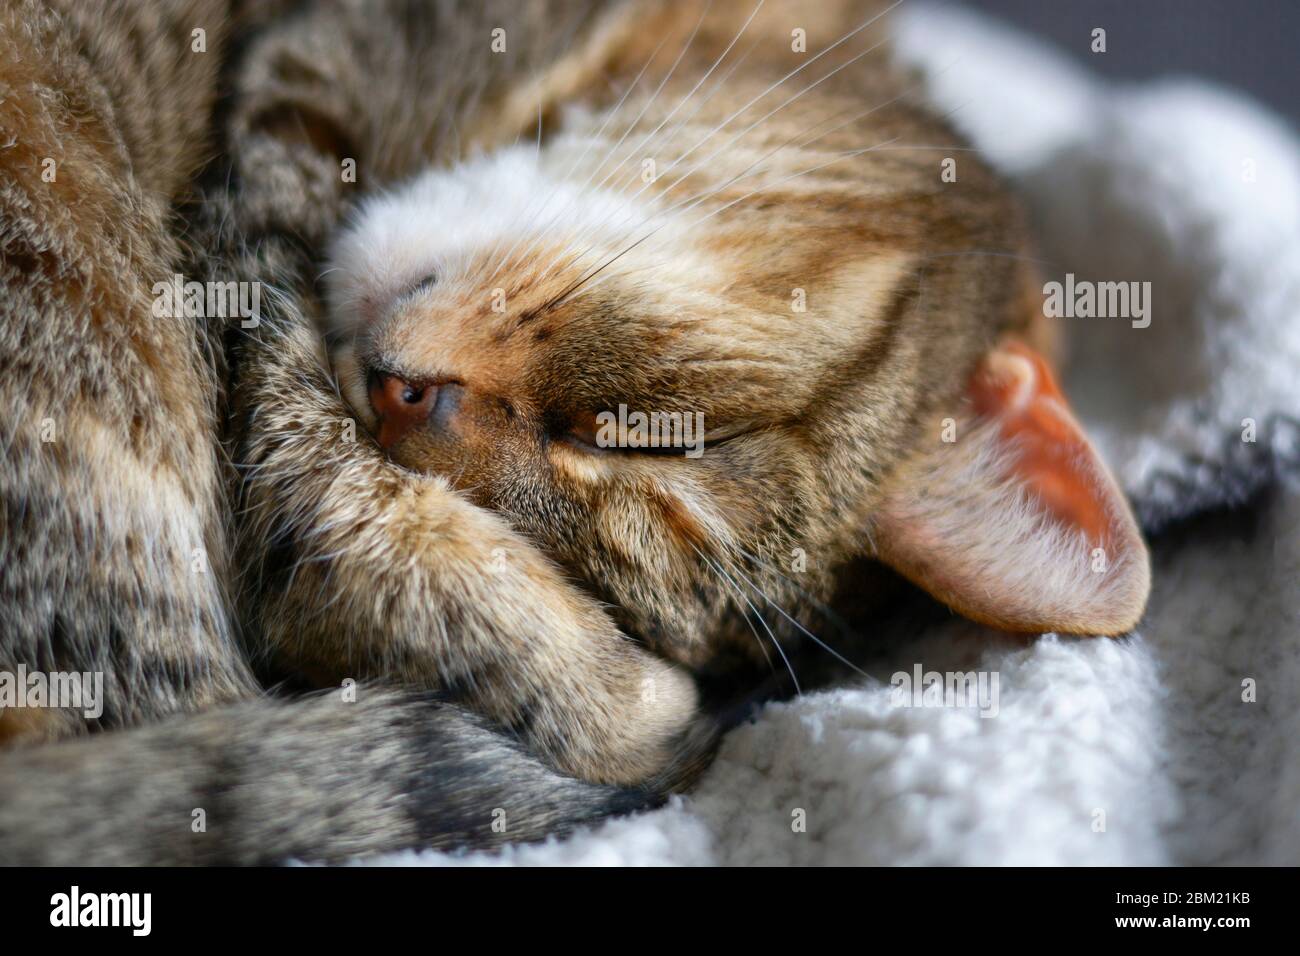 Completely relaxed cute cat is sleeping on soft blanket upside down and puts her paw to the face Stock Photo